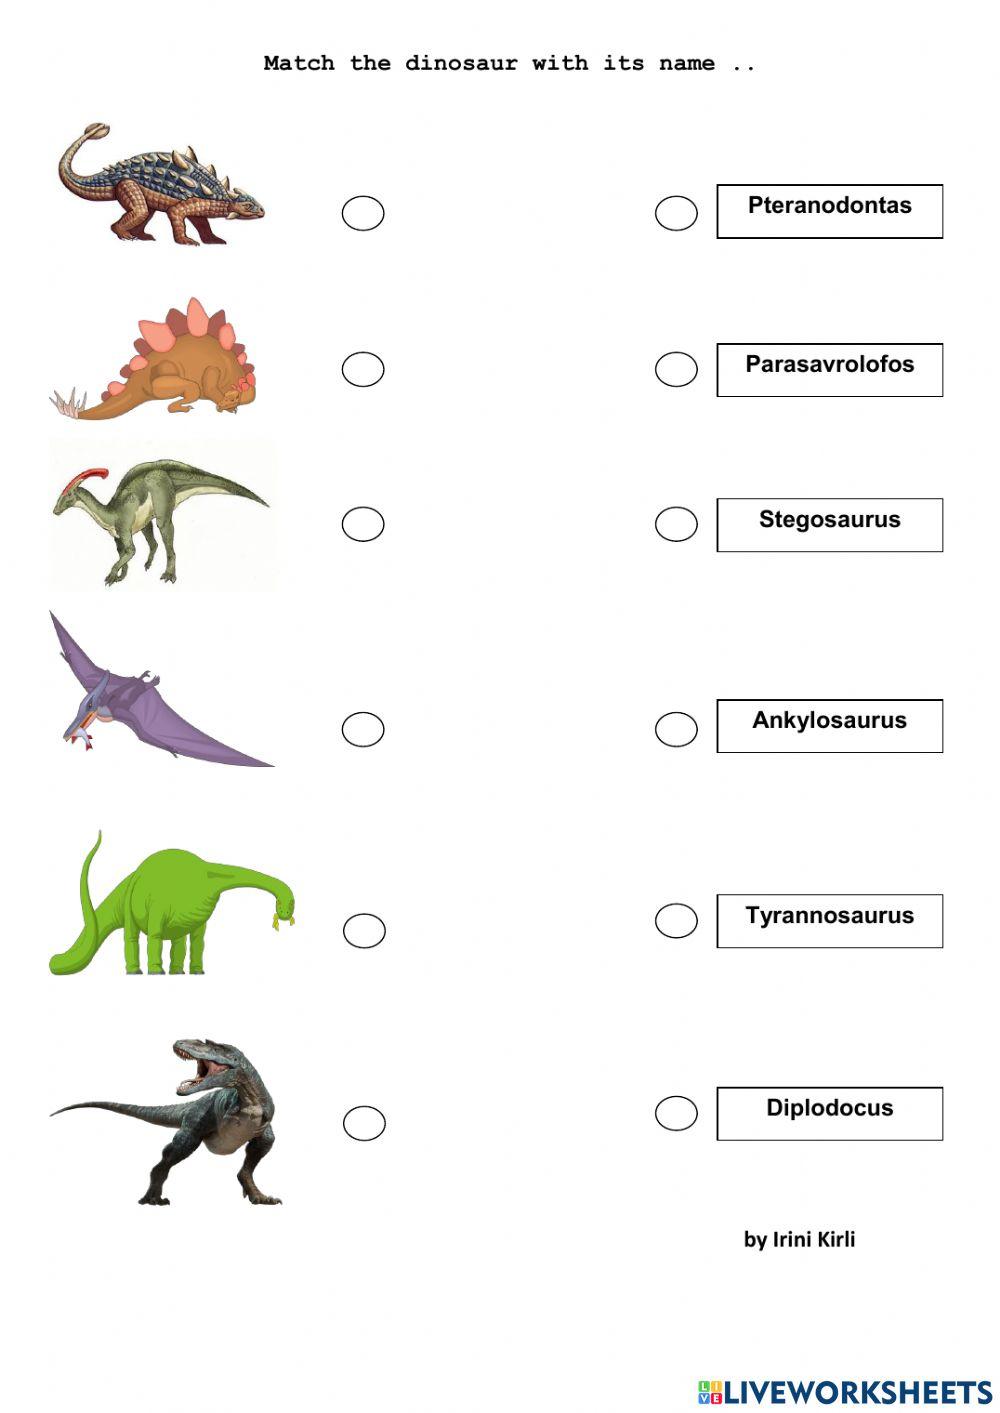 Match the dinosaur with its name